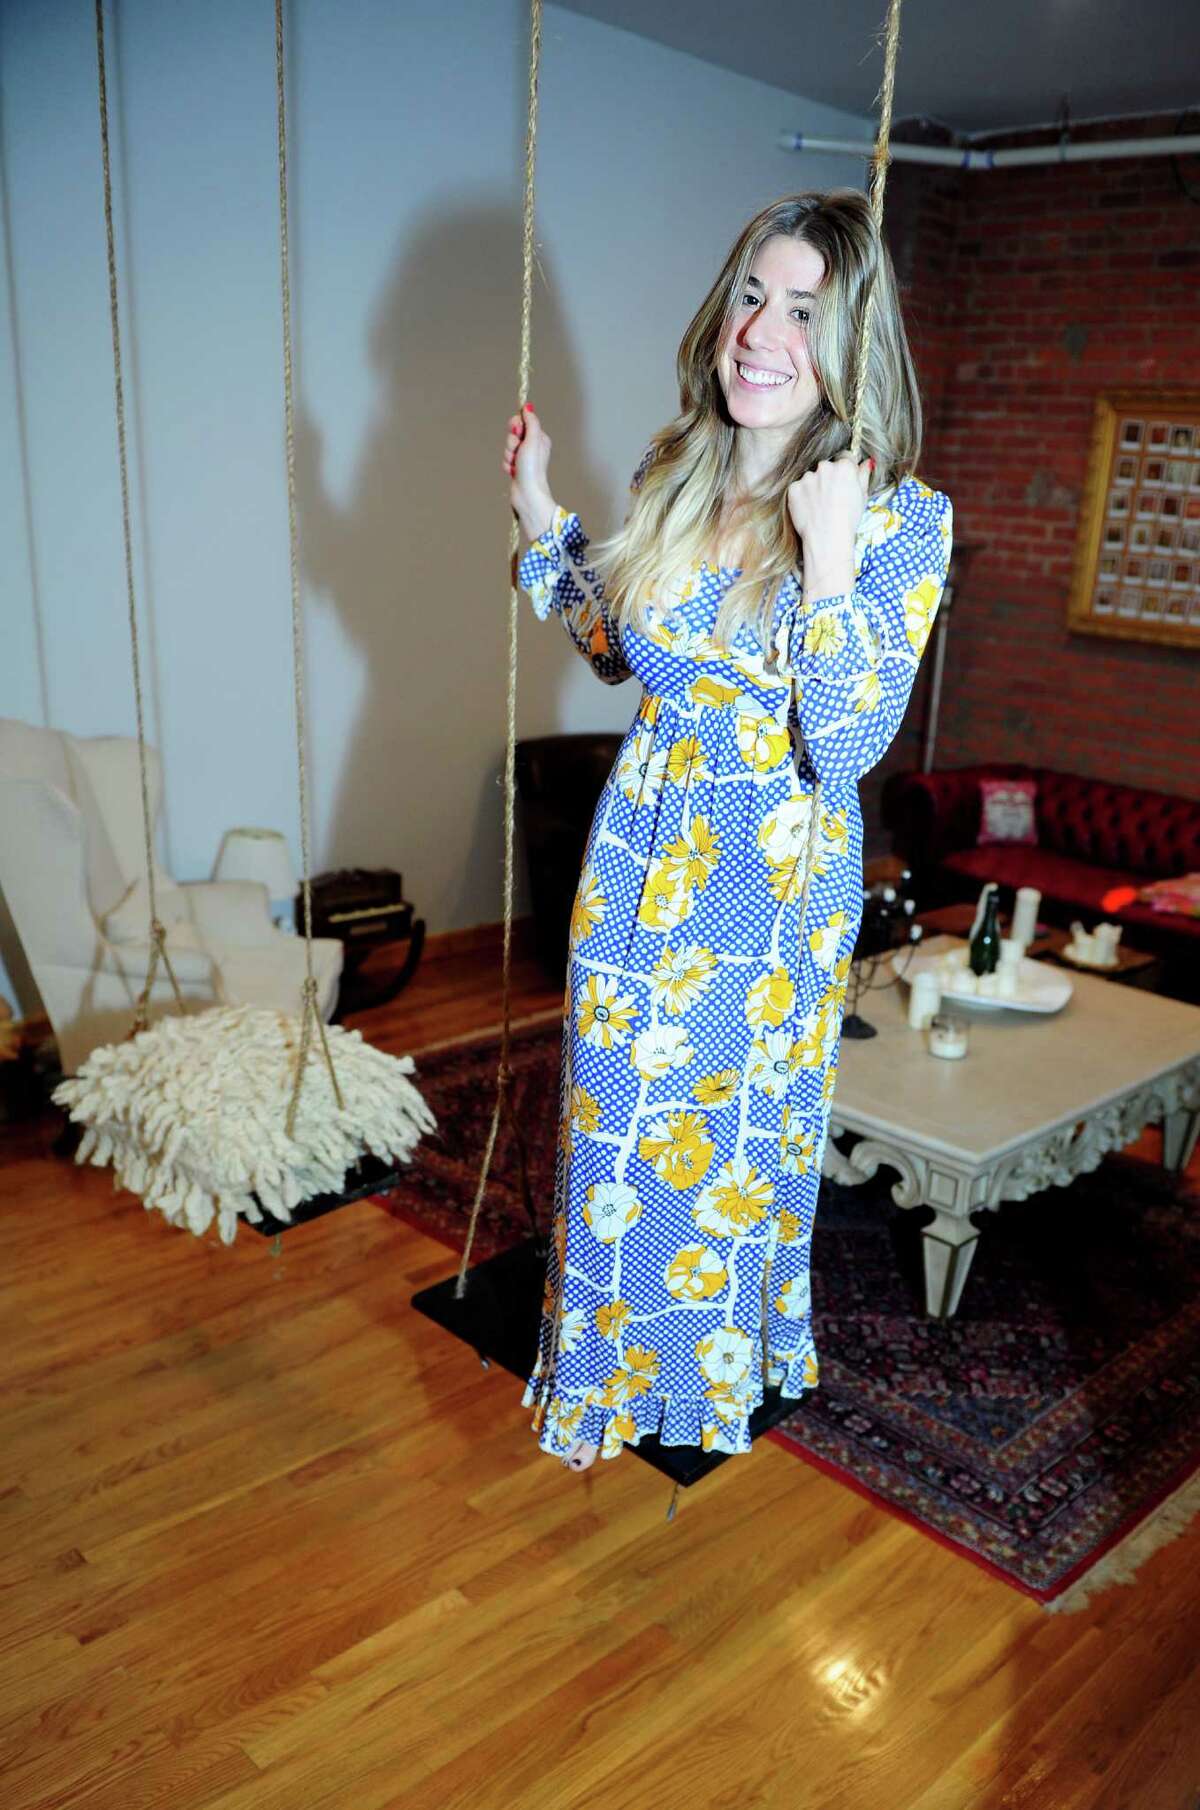 Avid thrift shop hunter Maddie Rhodes at home in Bridgeport, Conn. Rhodes is wearing a floral dress purchased at Stratfort Antiques for $45.